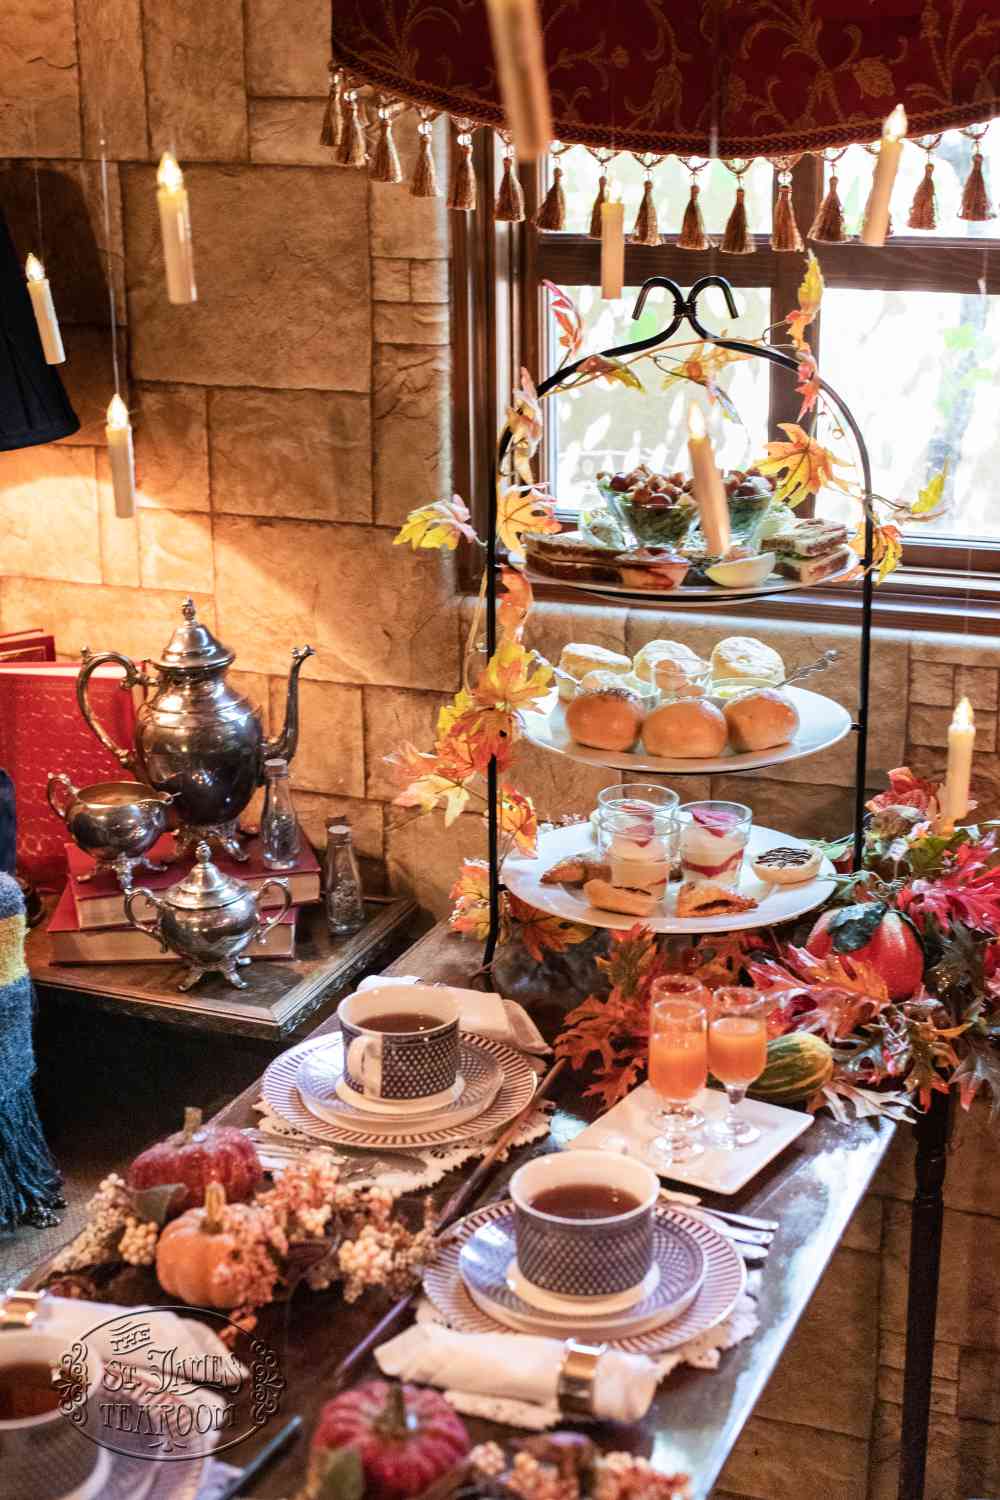 Afternoon Tea Menu - Recipes from the World of Wizards - Dine in Tea Tray